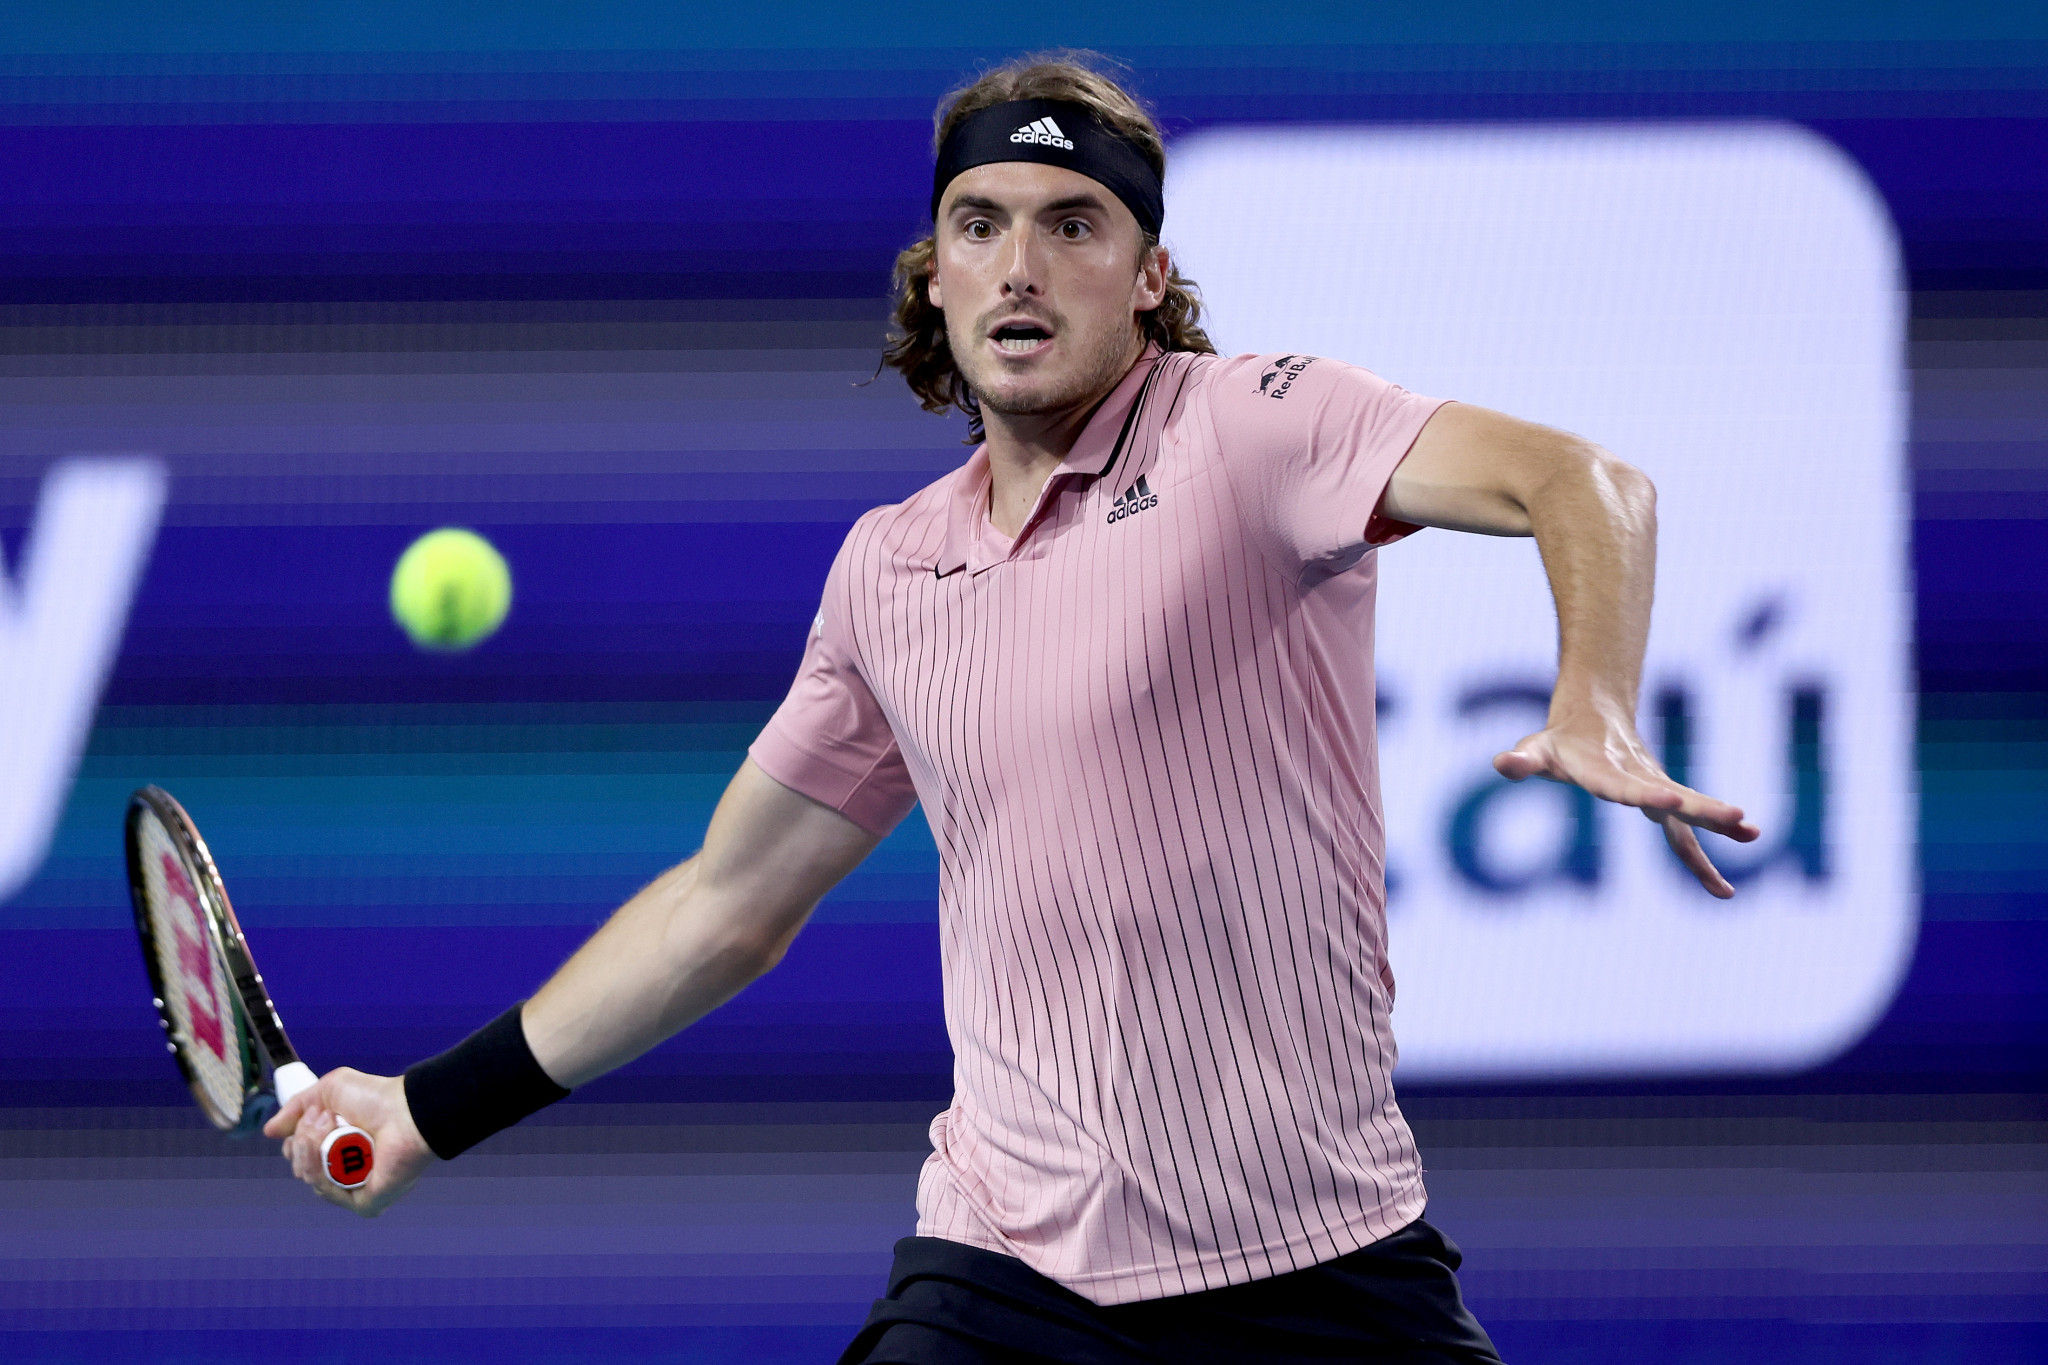 Stefanos Tsitsipas emerged victorious from a three-set tussle with JJ Wolfe ©Getty Images